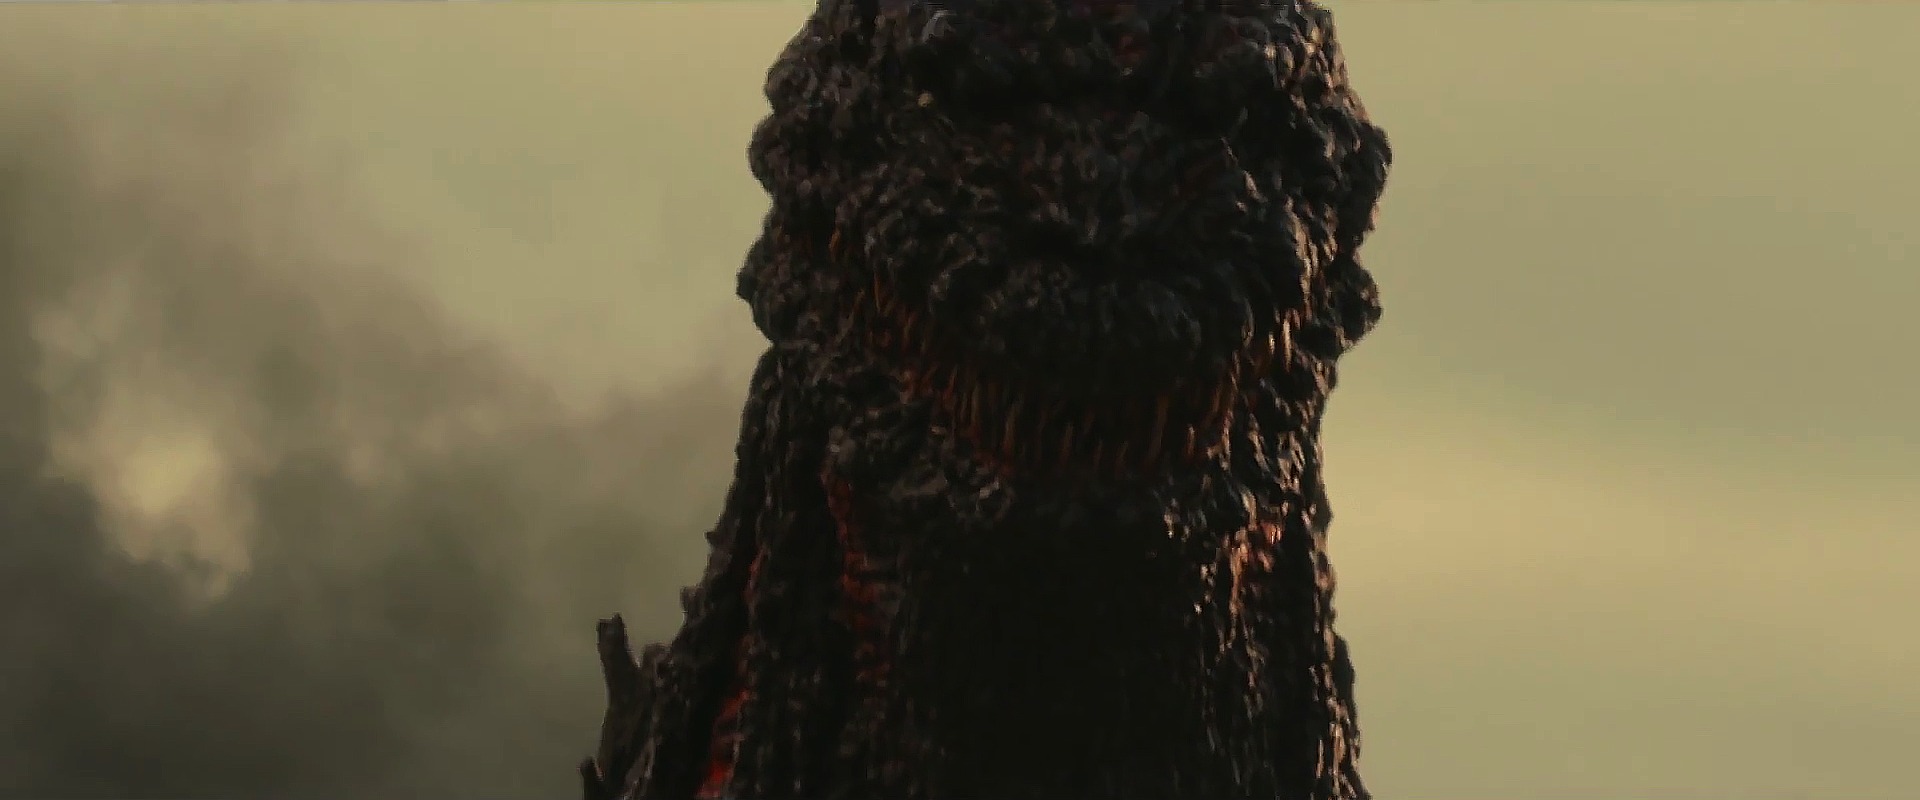 ‘Godzilla Resurgence’ releases first trailer, and it’s glorious!